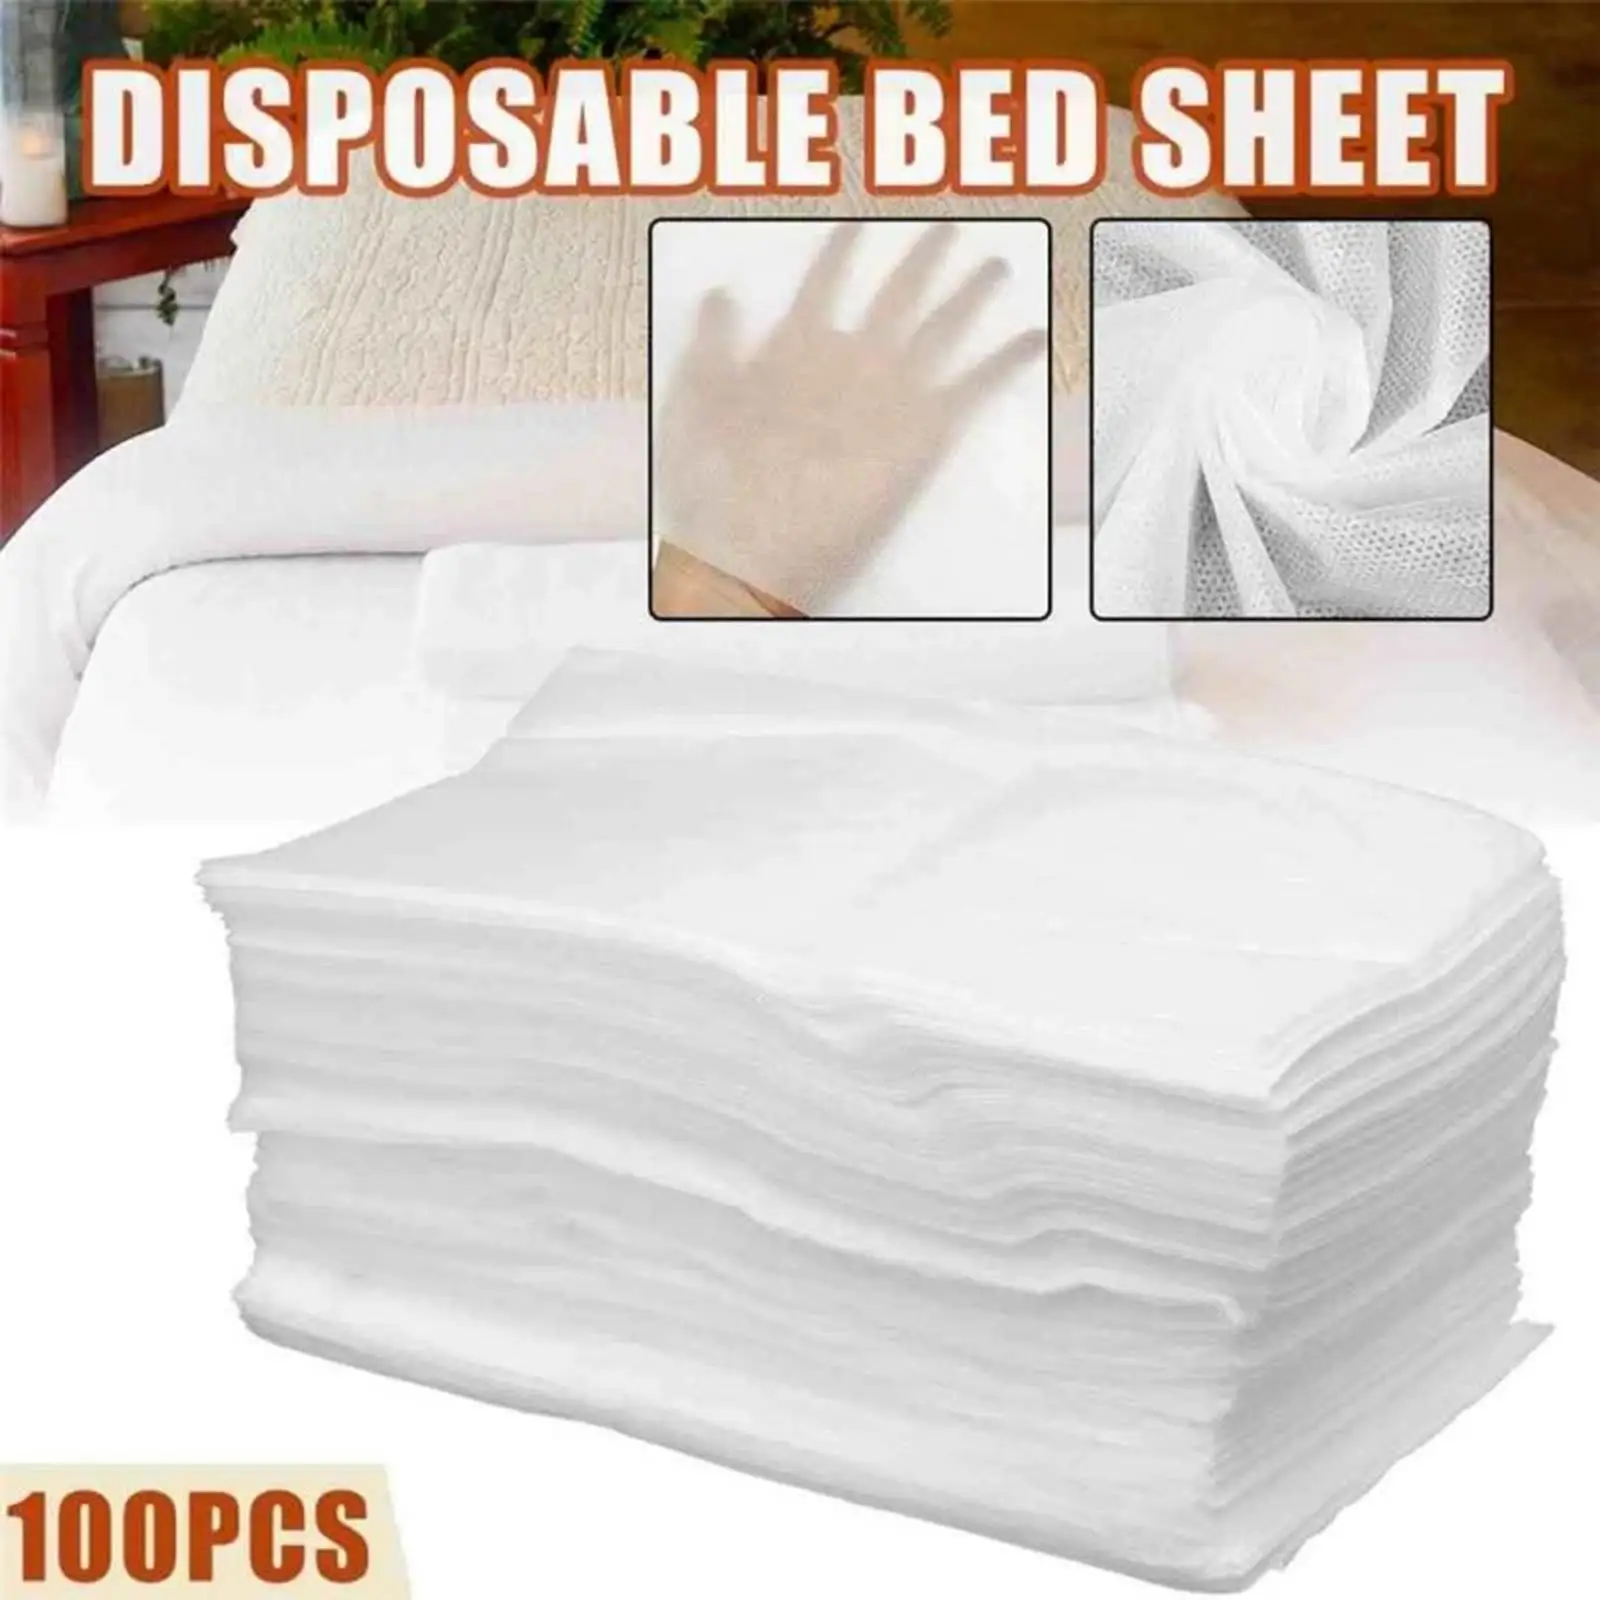 100 Pieces Disposable Massage Table Sheets Breathable for Hotels Esthetician